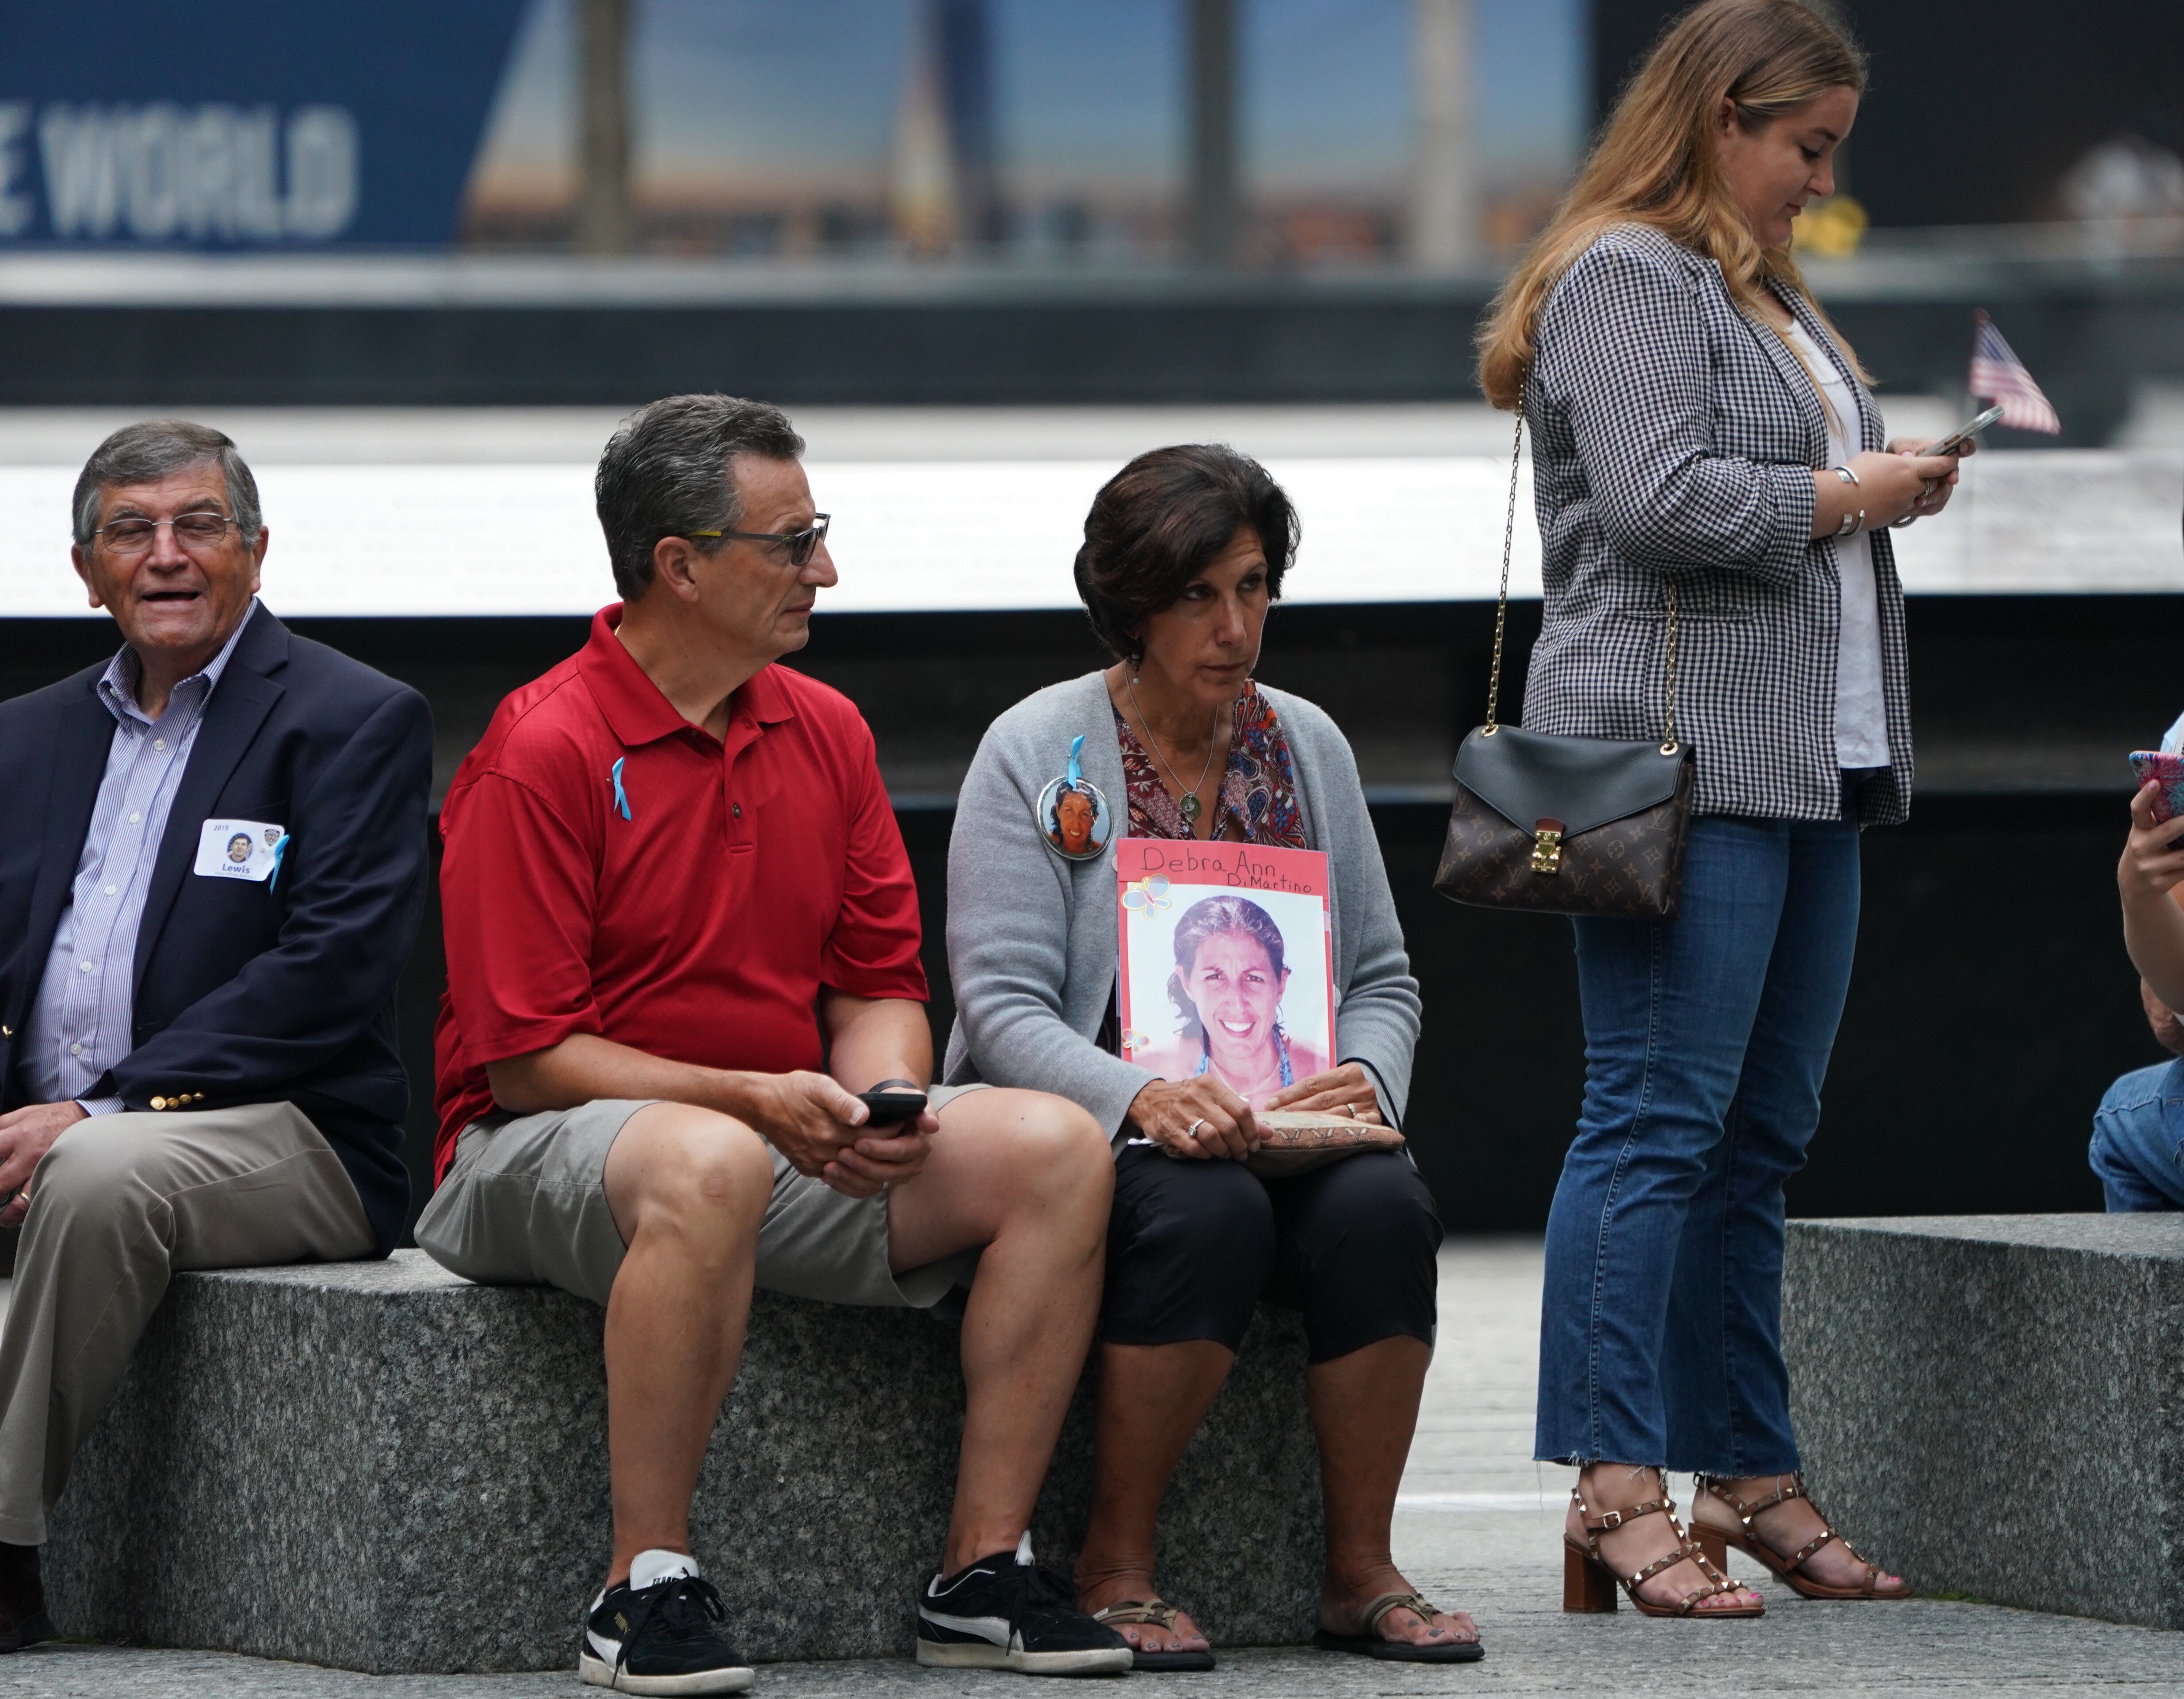 Relatives of victims attend the September 11 Commemoration Ceremony at the 9/11 Memorial at the World Trade Center